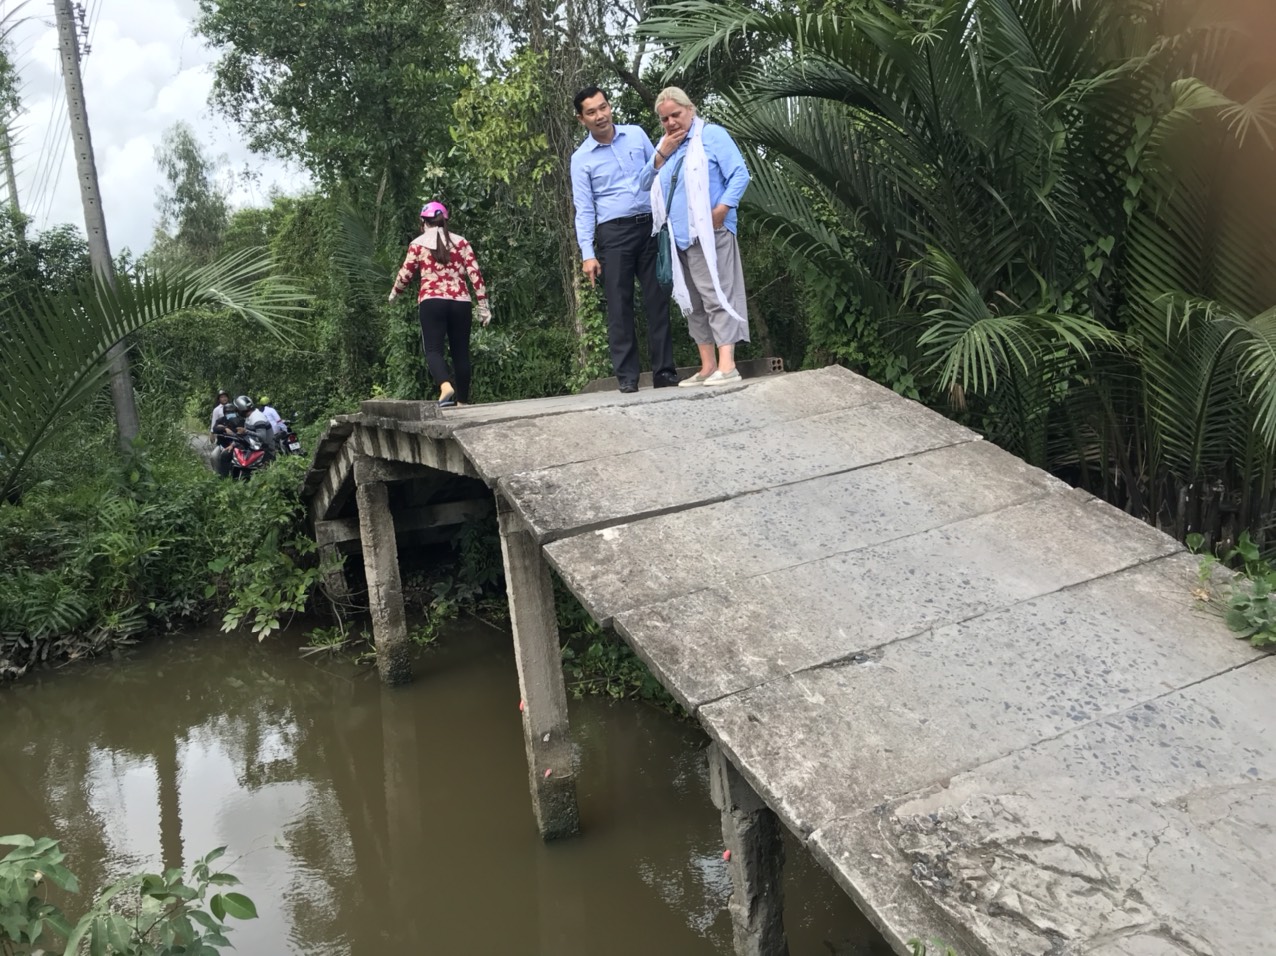 Mr. Le Minh Tuan - Vice Chairman Union of Friendship Organizations and Ms. Helenita Noble - Project Manager of CNCF surveyed some projects on building bridges in Long My district.